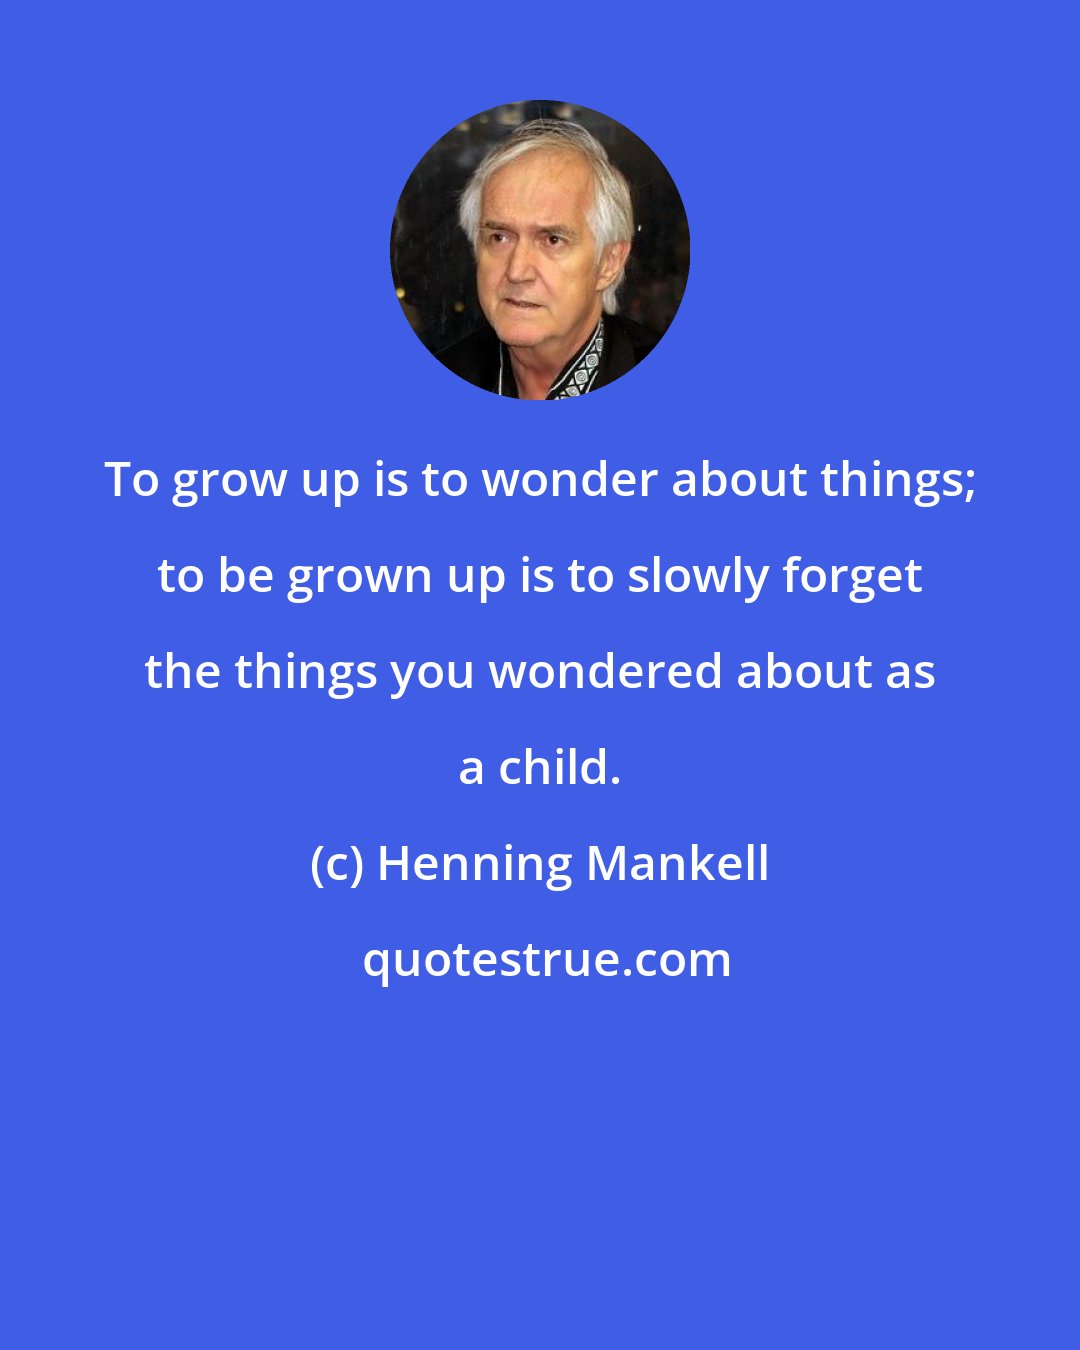 Henning Mankell: To grow up is to wonder about things; to be grown up is to slowly forget the things you wondered about as a child.